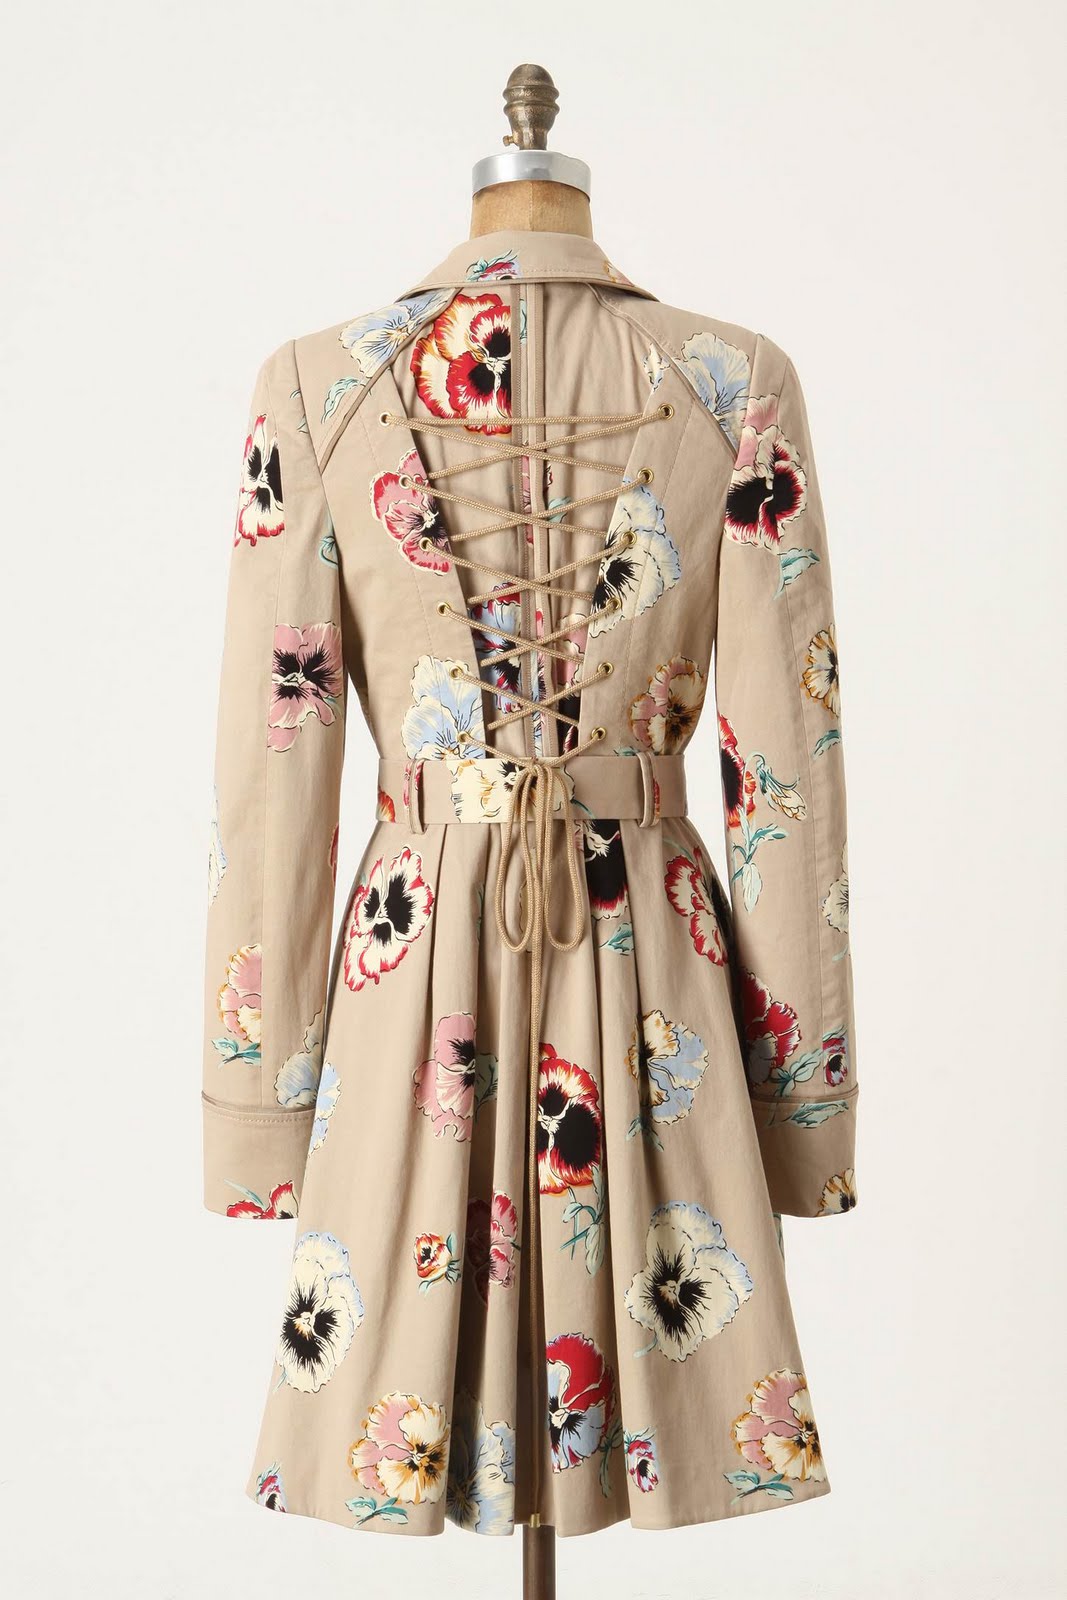 Breakfast at Anthropologie: Trench Coats